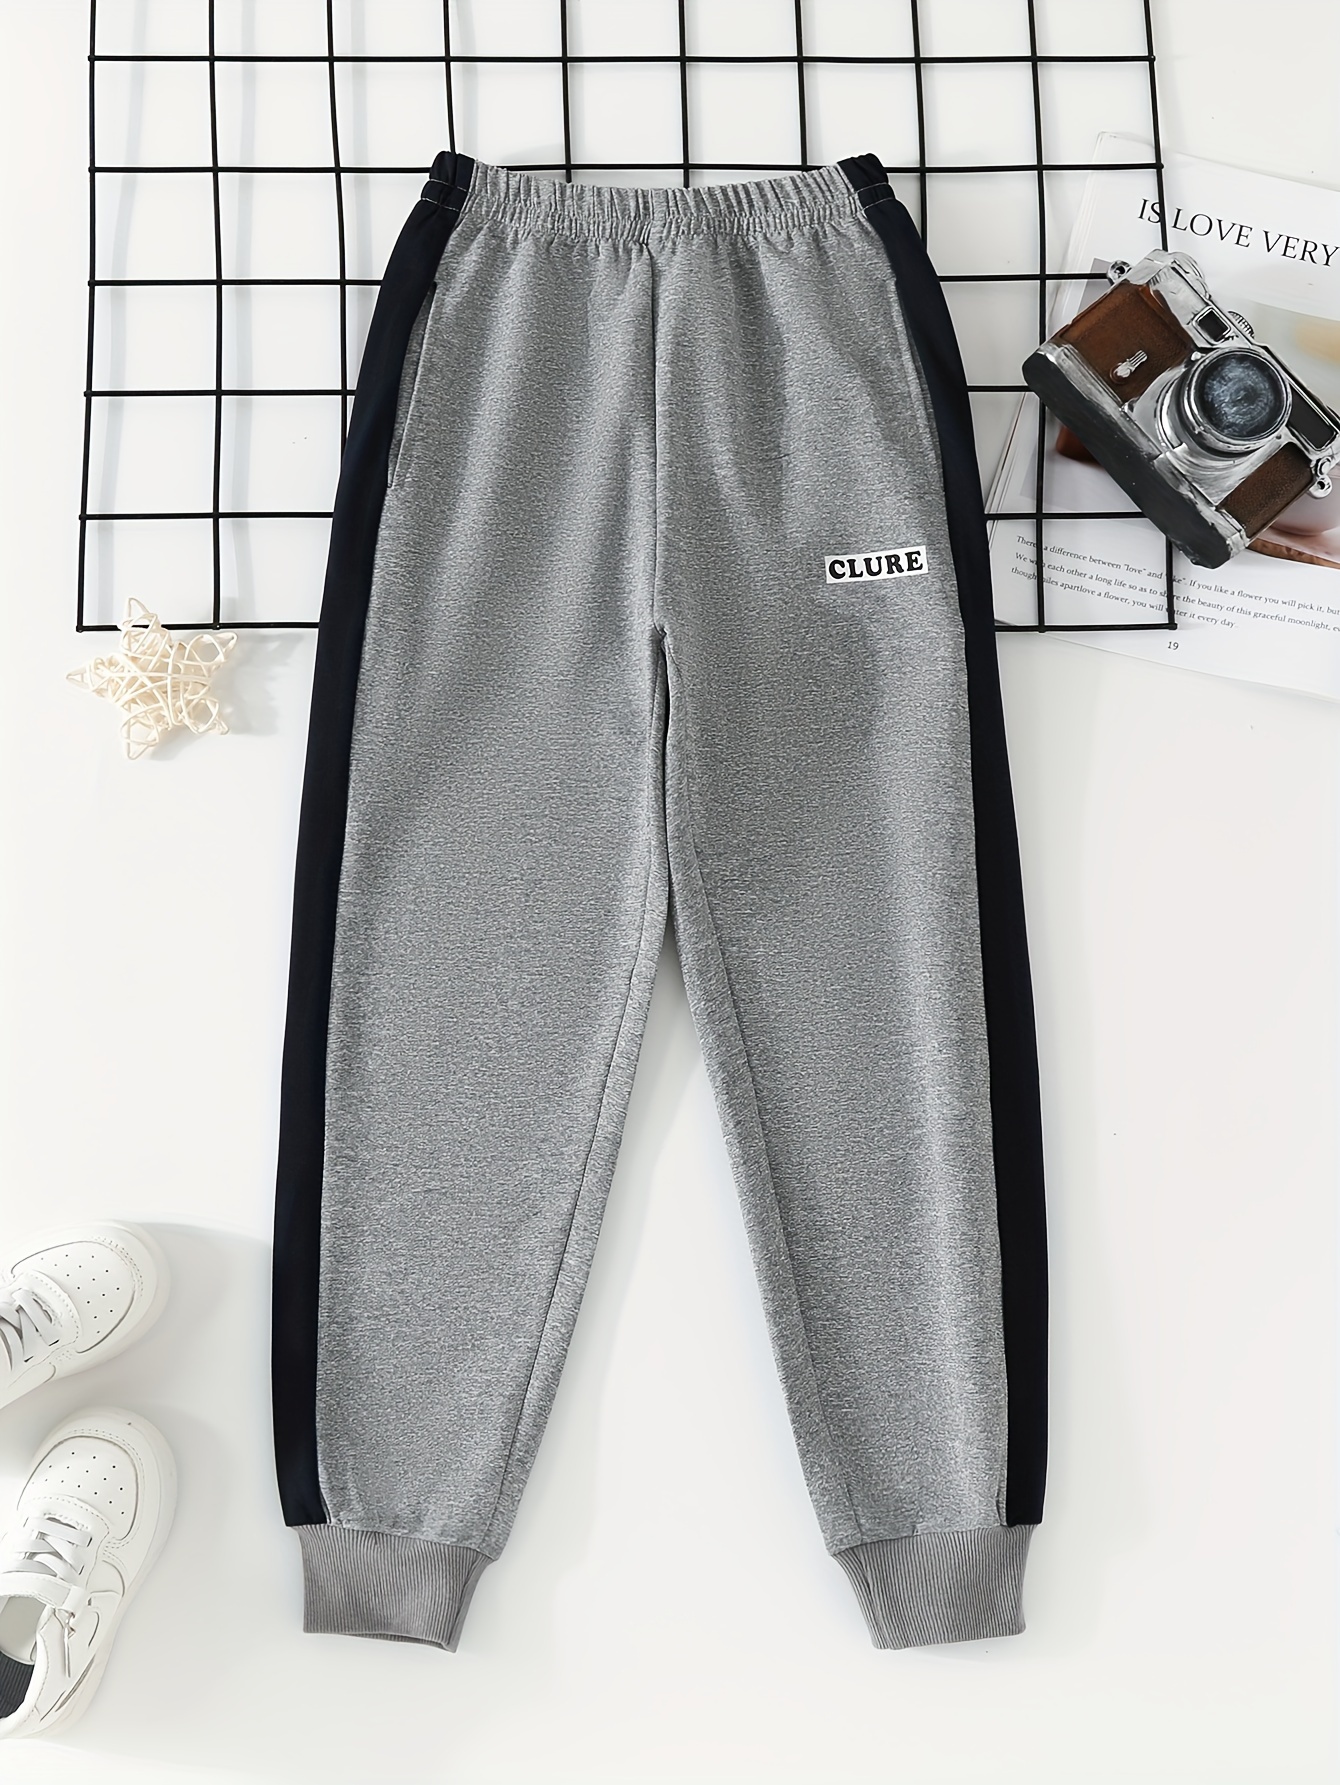 so comfy! will be wearing these pants all fall + winter